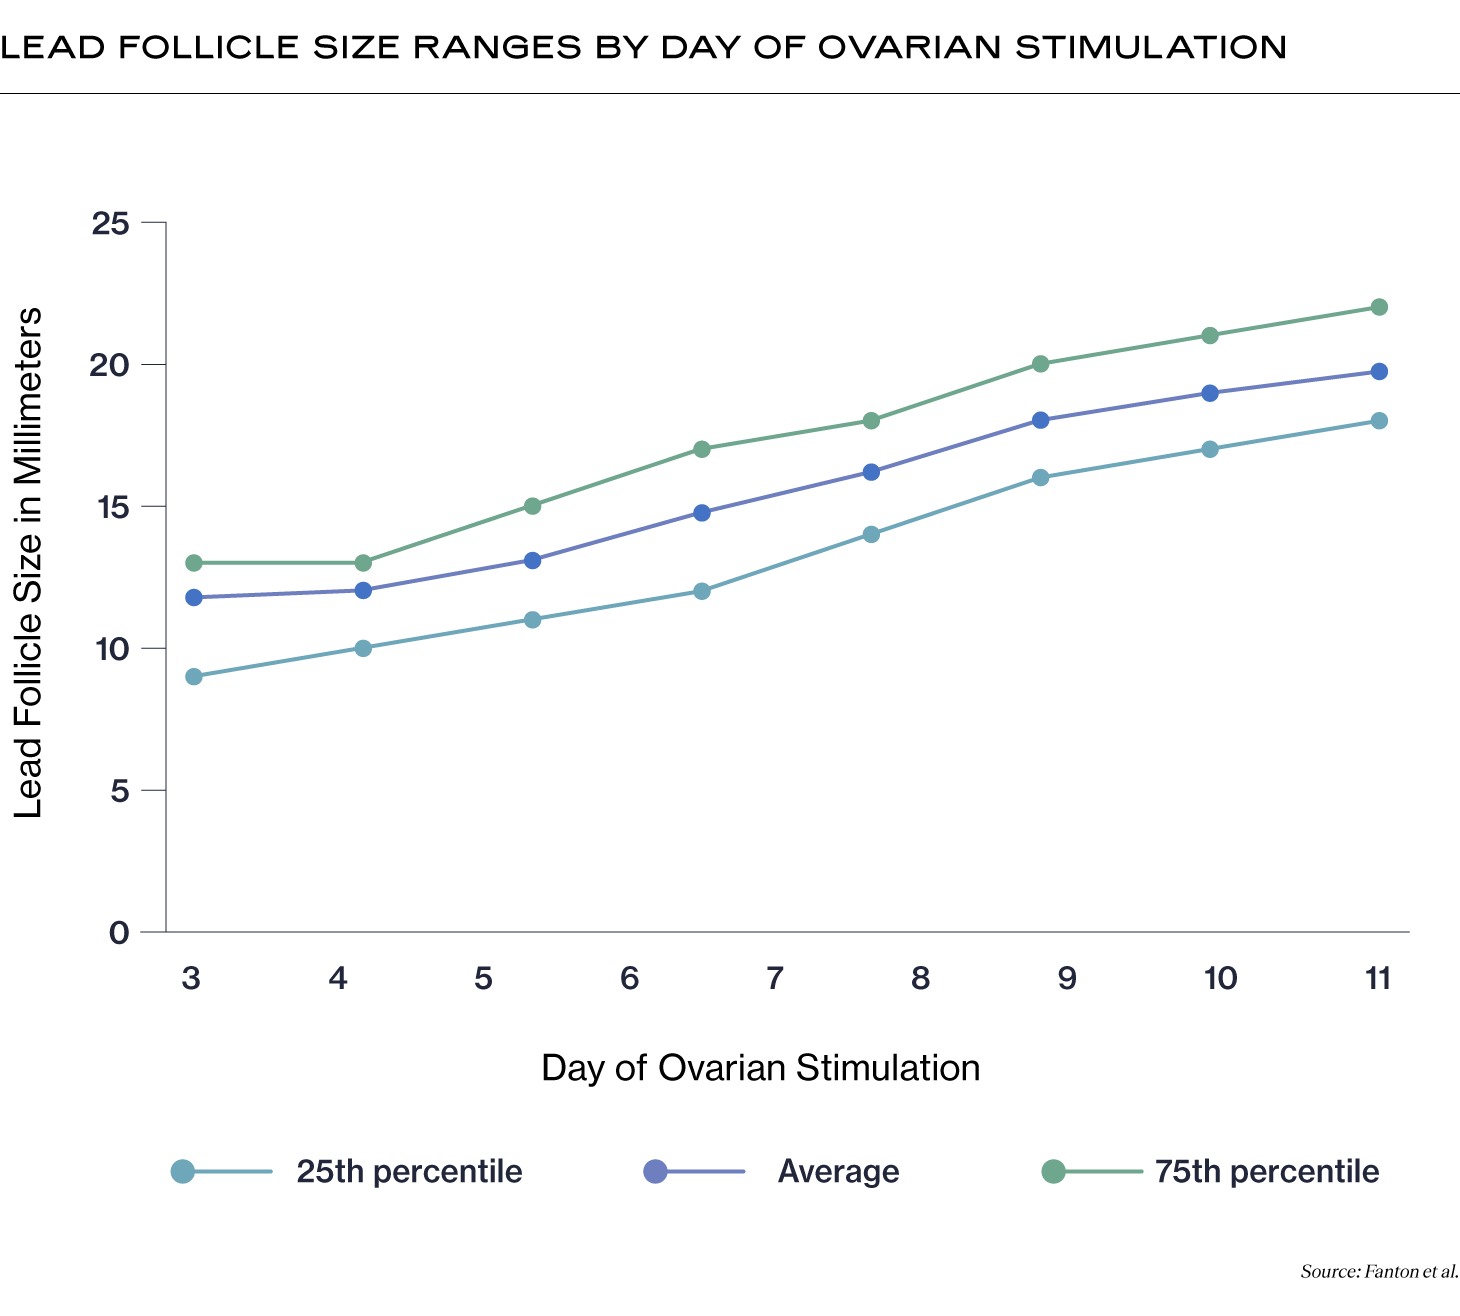 Lead Follicle Size Ranges by Day of Ovarian Stimulation